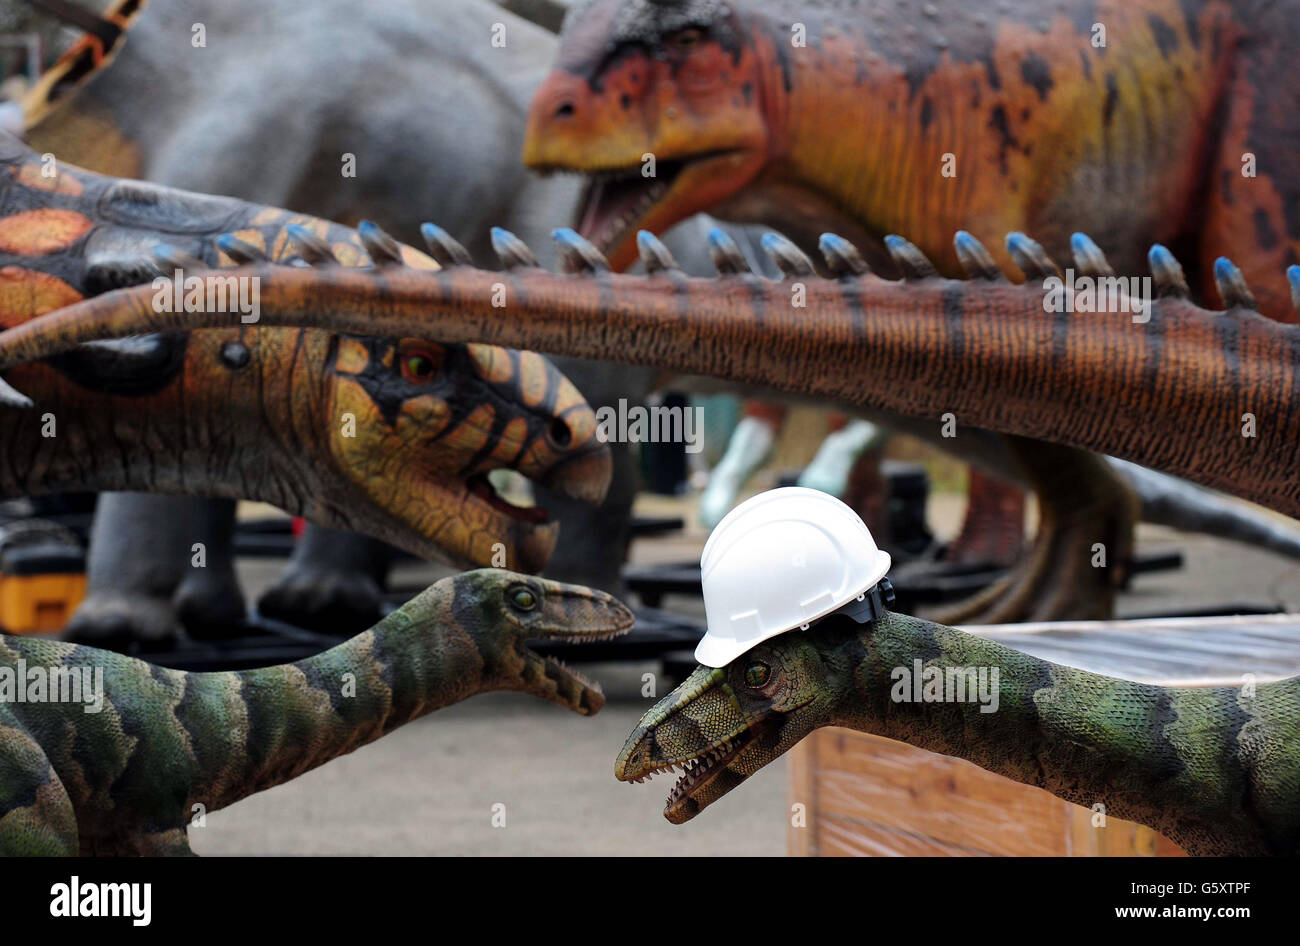 A construction worker's helmet sits on a Coelophysis dinosaur during its arrival at Twycross Zo where fifteen dinosaurs are the main feature of a brand new attraction opening Easter 2013, Dinosaur Valley at the zoo in Warwickshire. Stock Photo